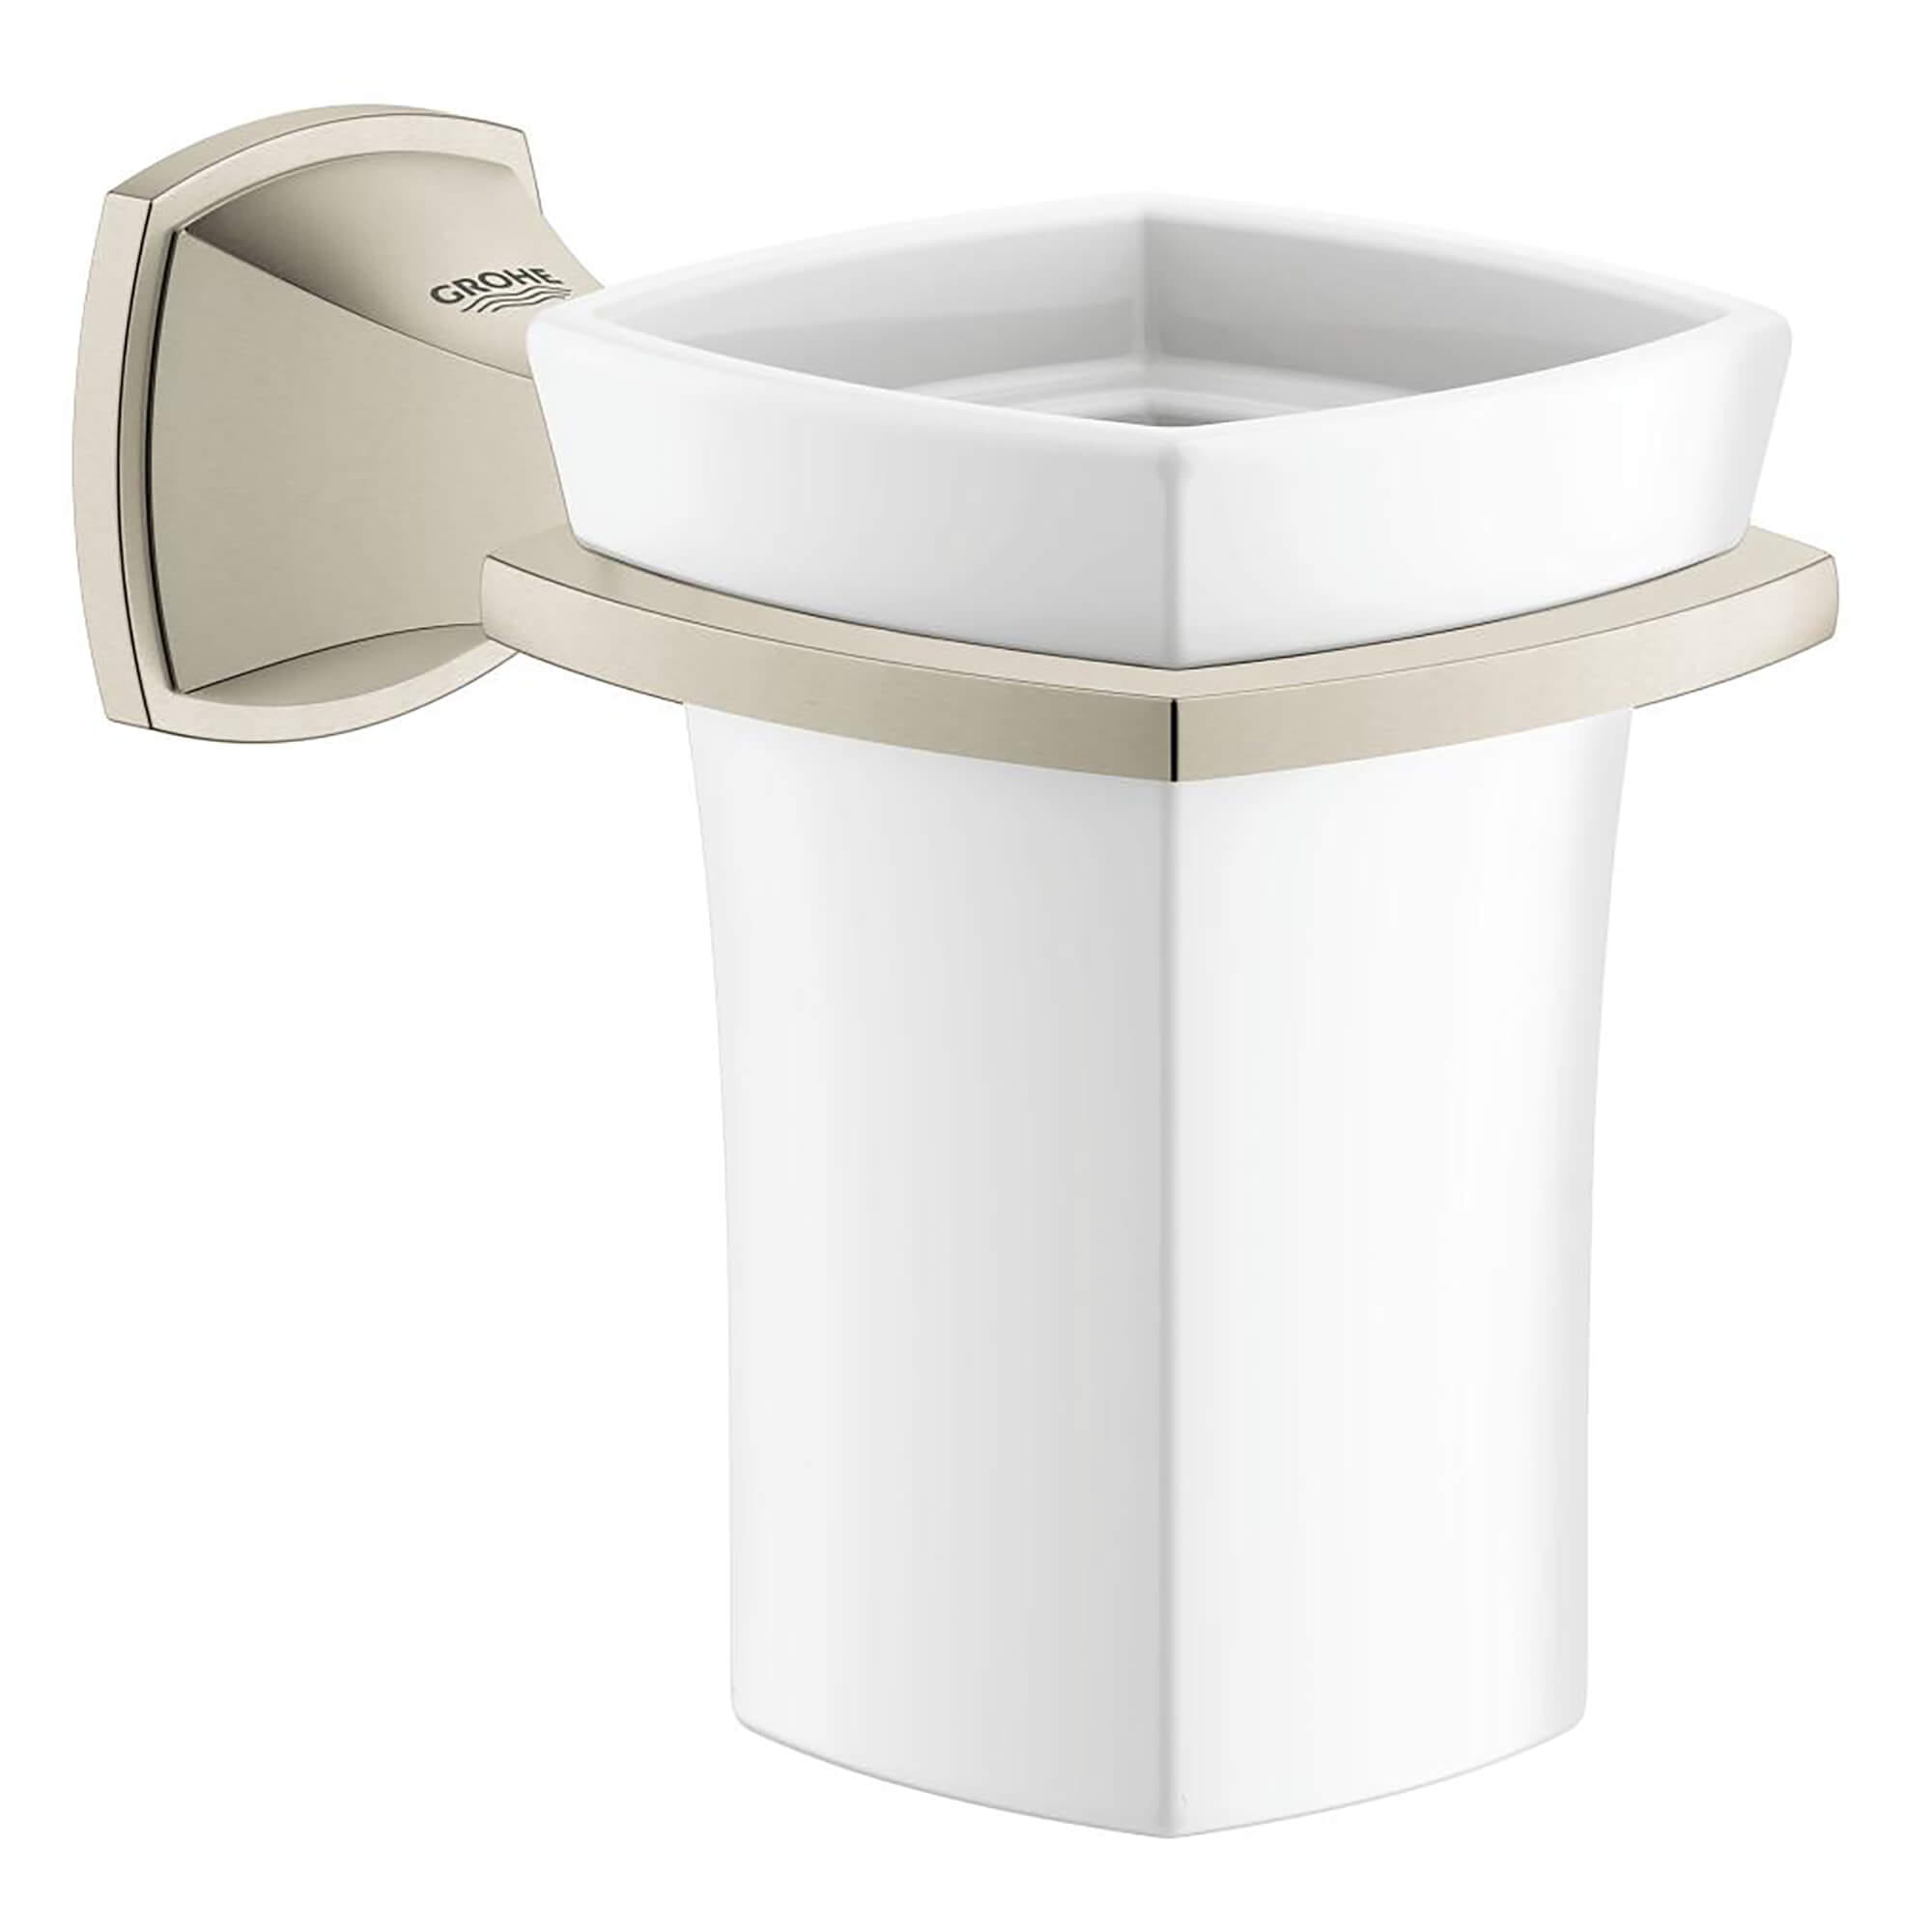 Ceramic Tumbler with Holder GROHE BRUSHED NICKEL